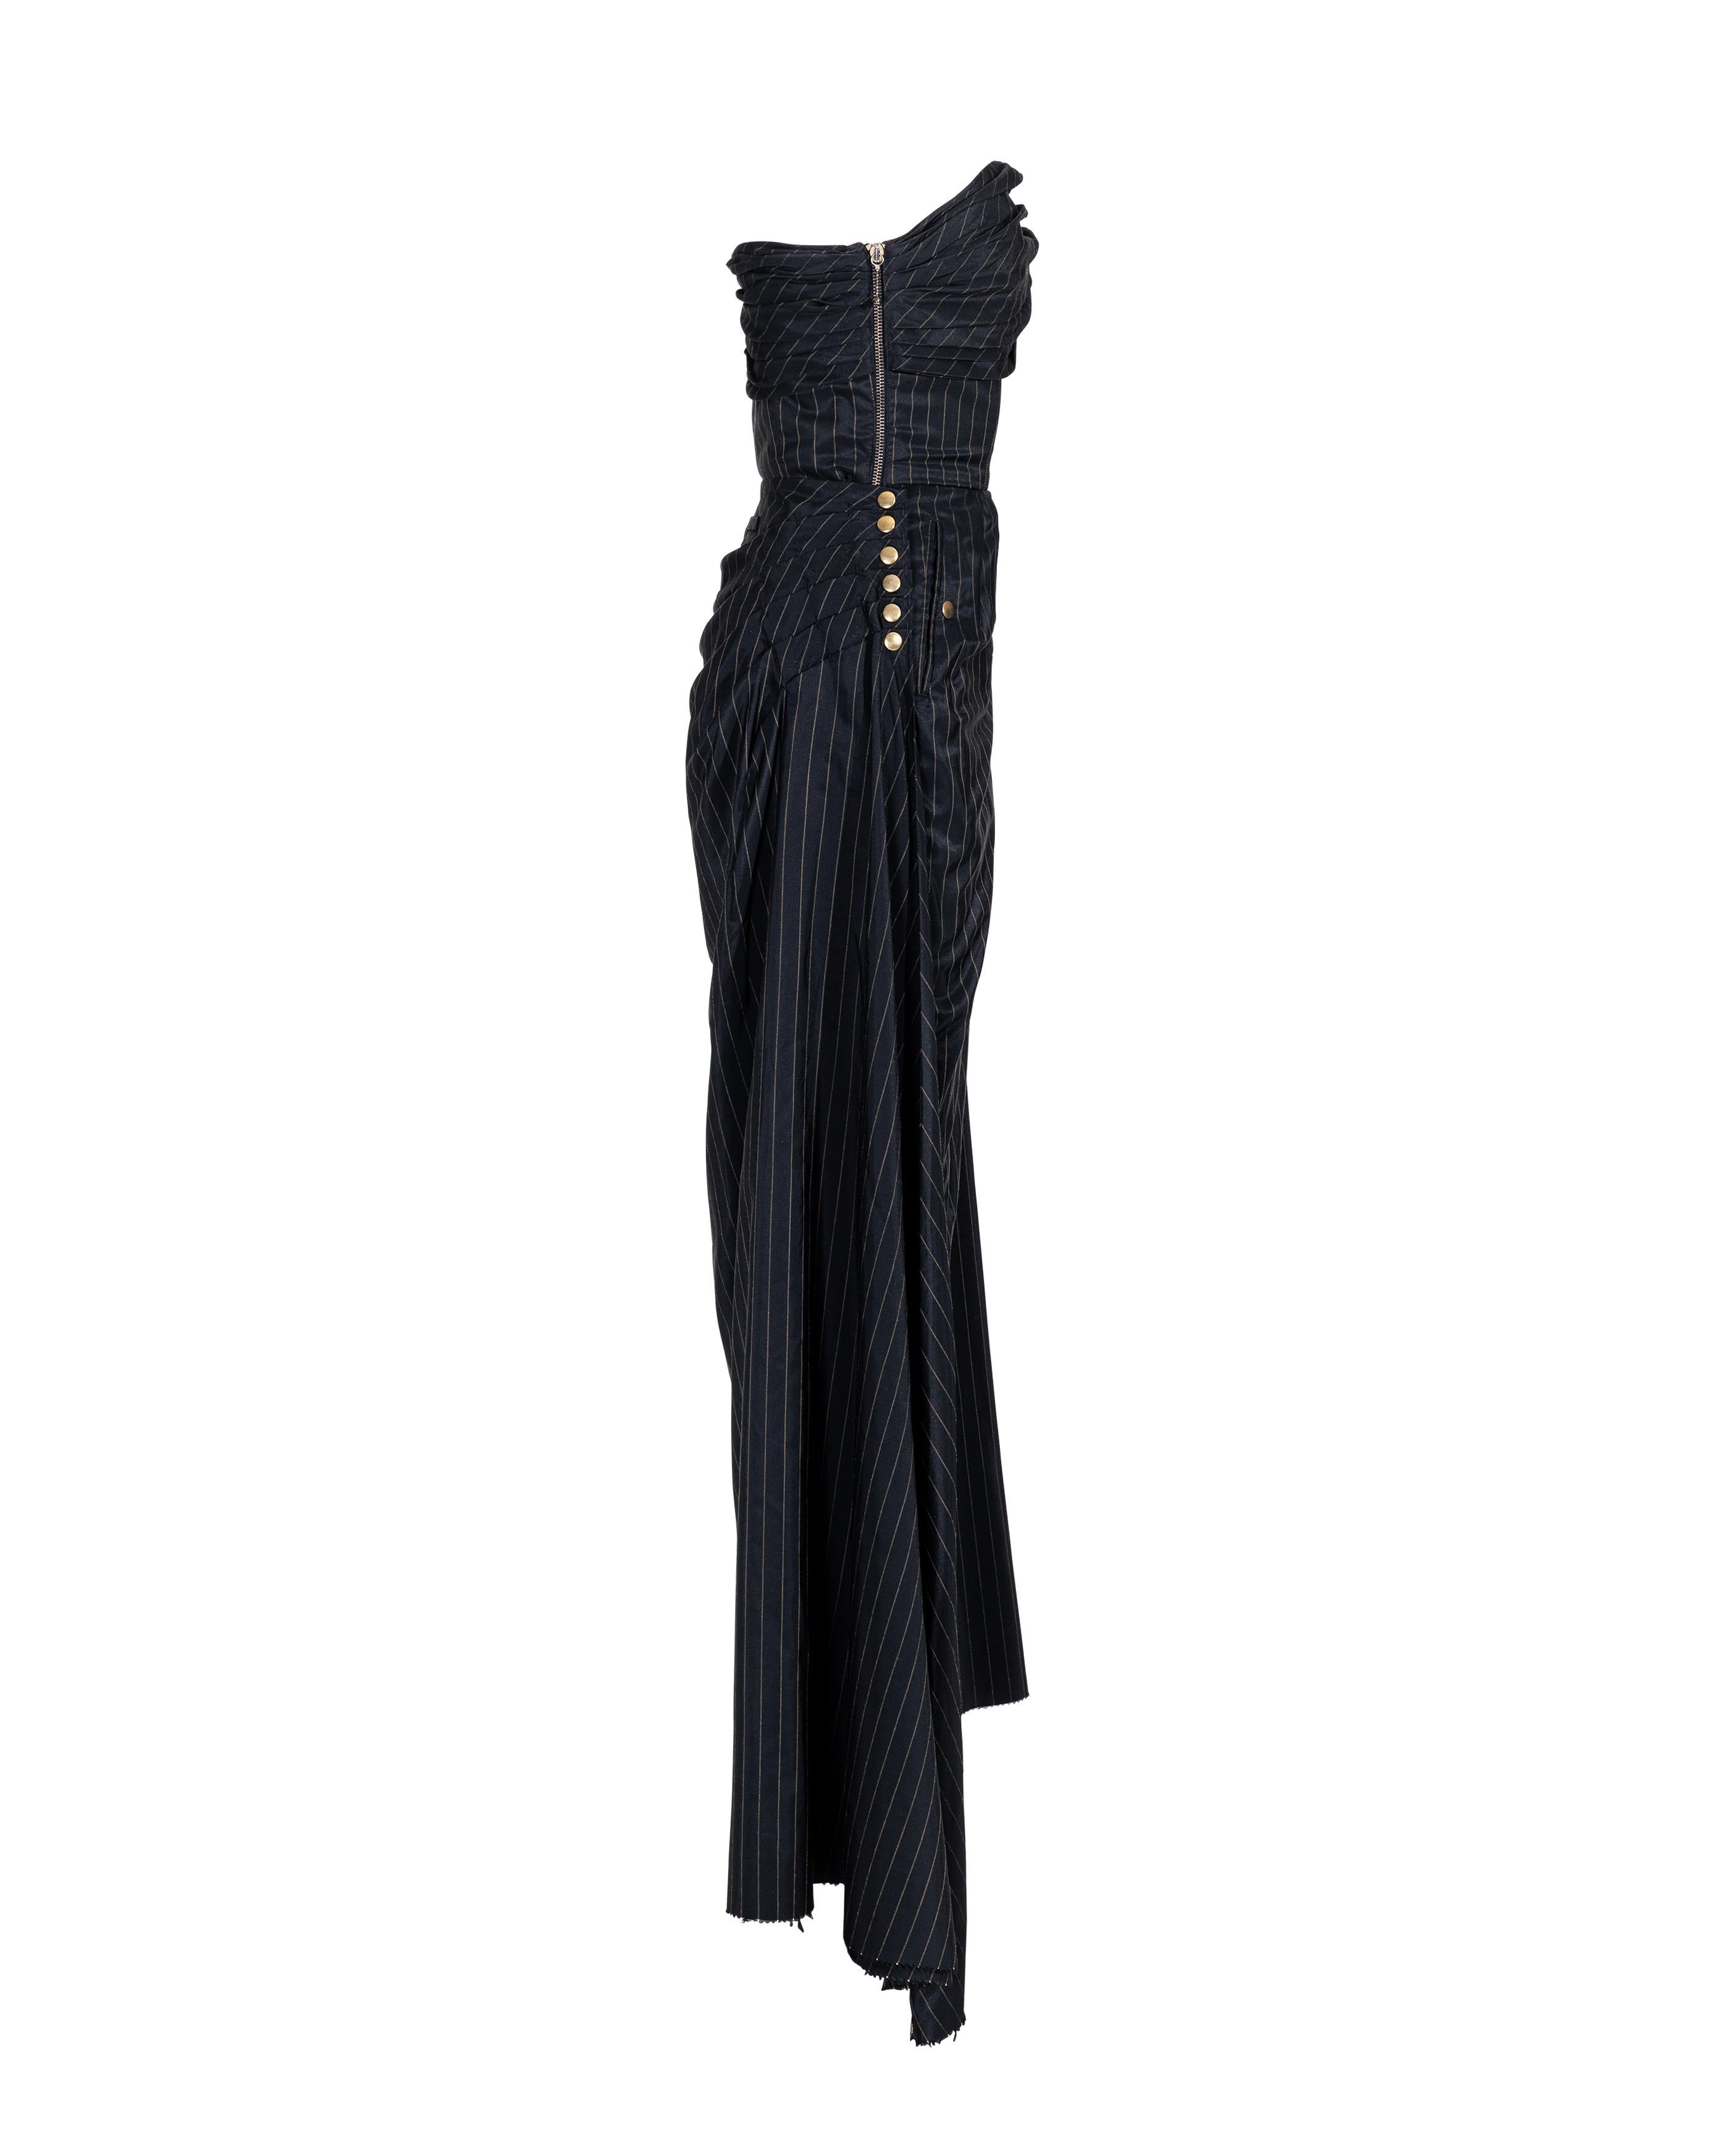 S/S 1995 Jean Paul Gaultier pinstripe strapless bustle gown with gold-tone studded details at sides. Strapless striped dress with fitted waist and asymmetrical gathered bust and hip. Built-in corset with boning. Visible side bronze zip closure, with